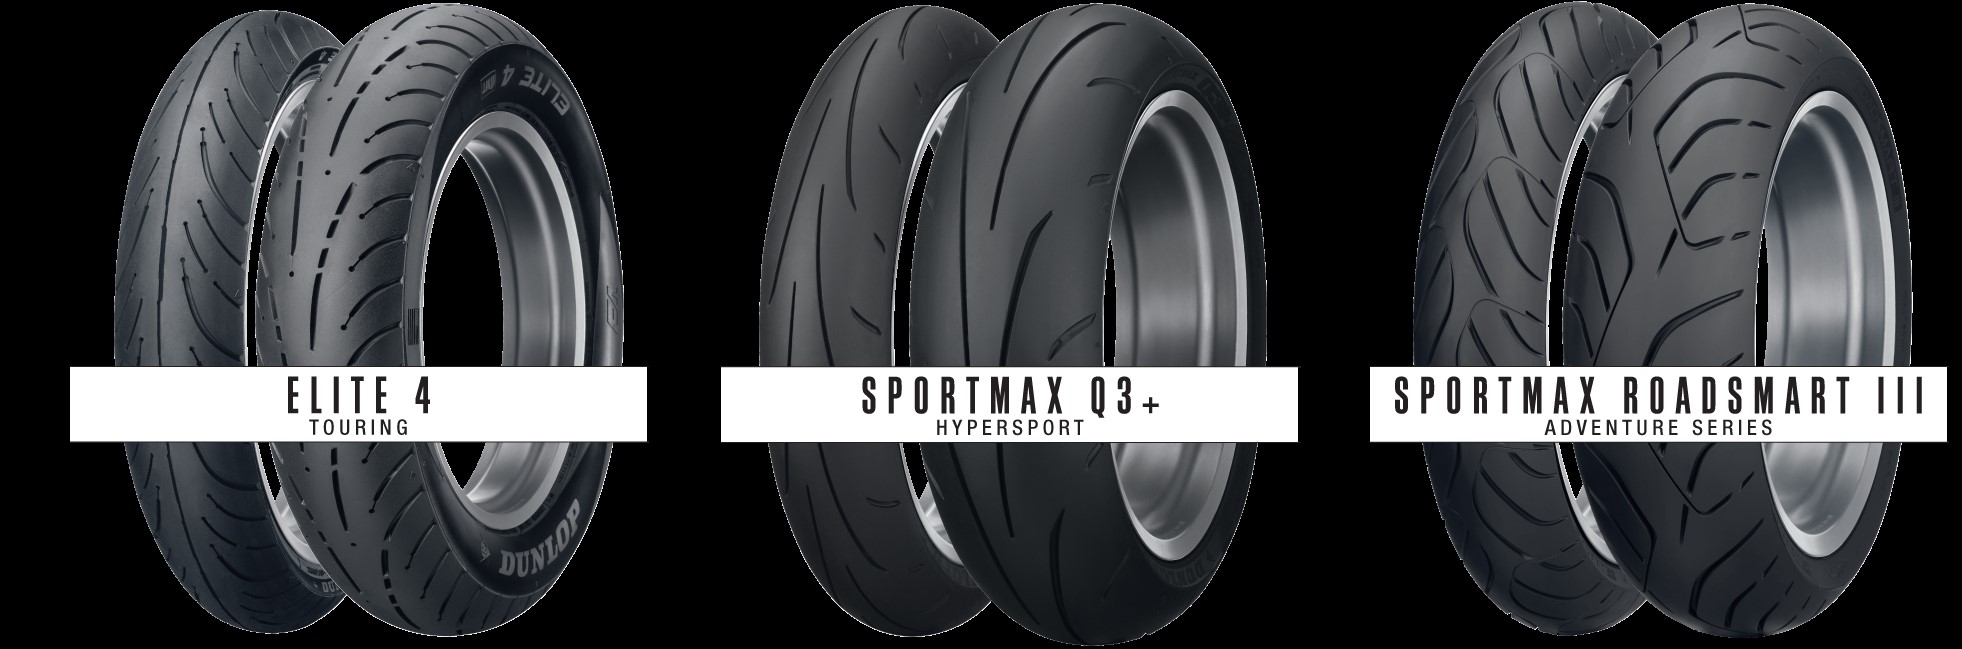 peber bundt frisør Dunlop Introduces New Sizes For Sportmax And Elite Tires - Roadracing World  Magazine | Motorcycle Riding, Racing & Tech News